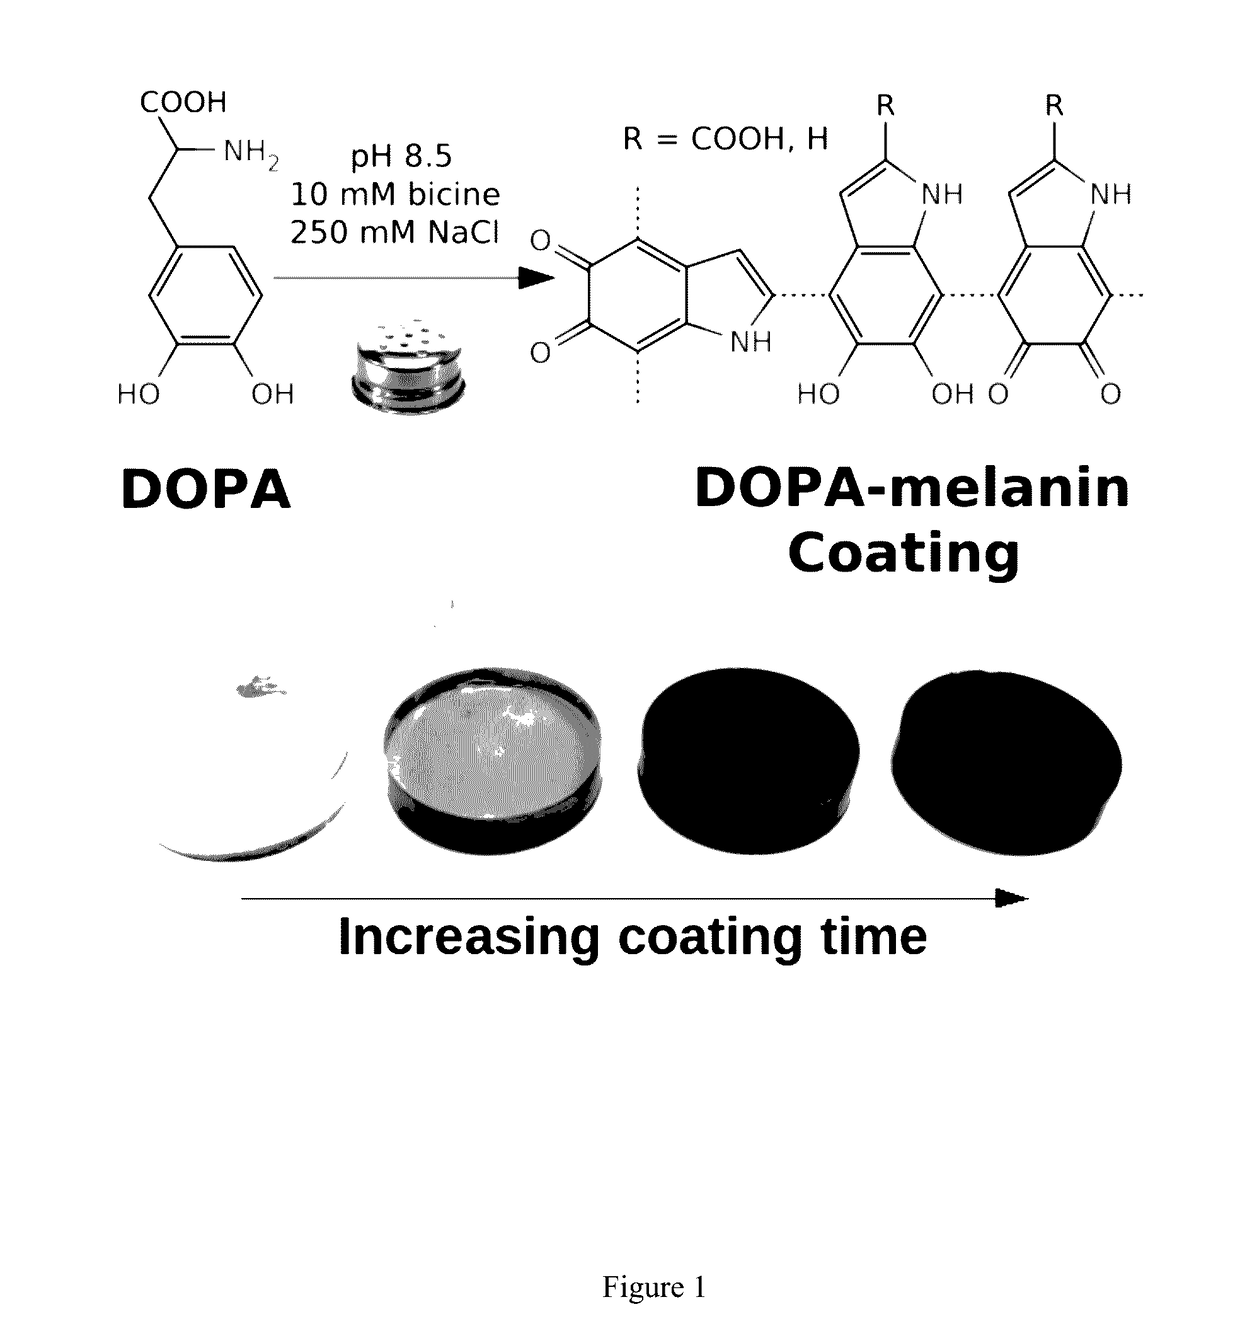 DOPA-melanin formation in high ionic strength solutions